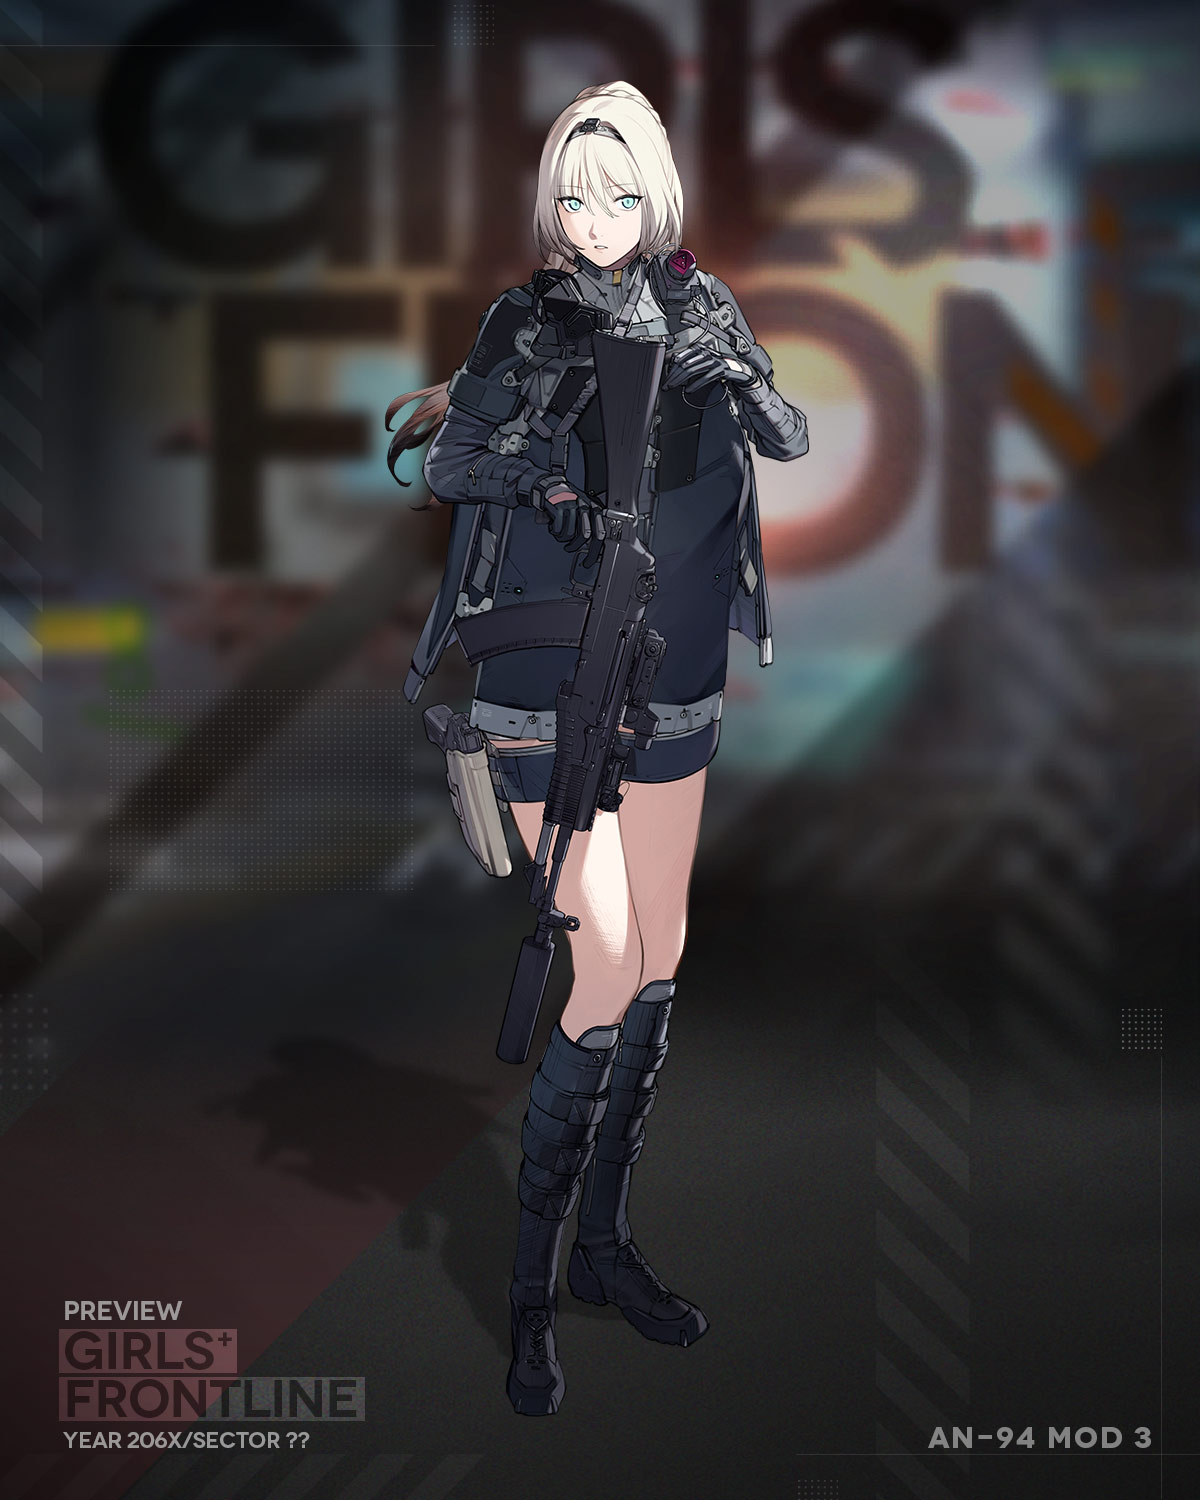 1girl an-94 an-94_(girls'_frontline) aqua_eyes assault_rifle bangs blonde_hair body_armor boots duoyuanjun girls'_frontline gloves gun hairband handgun highres holding holding_gun holding_weapon holster holstered_weapon long_hair looking_at_viewer mod3_(girls'_frontline) official_art parted_lips ponytail rifle solo standing suppressor tactical_clothes thigh_boots thigh_holster weapon